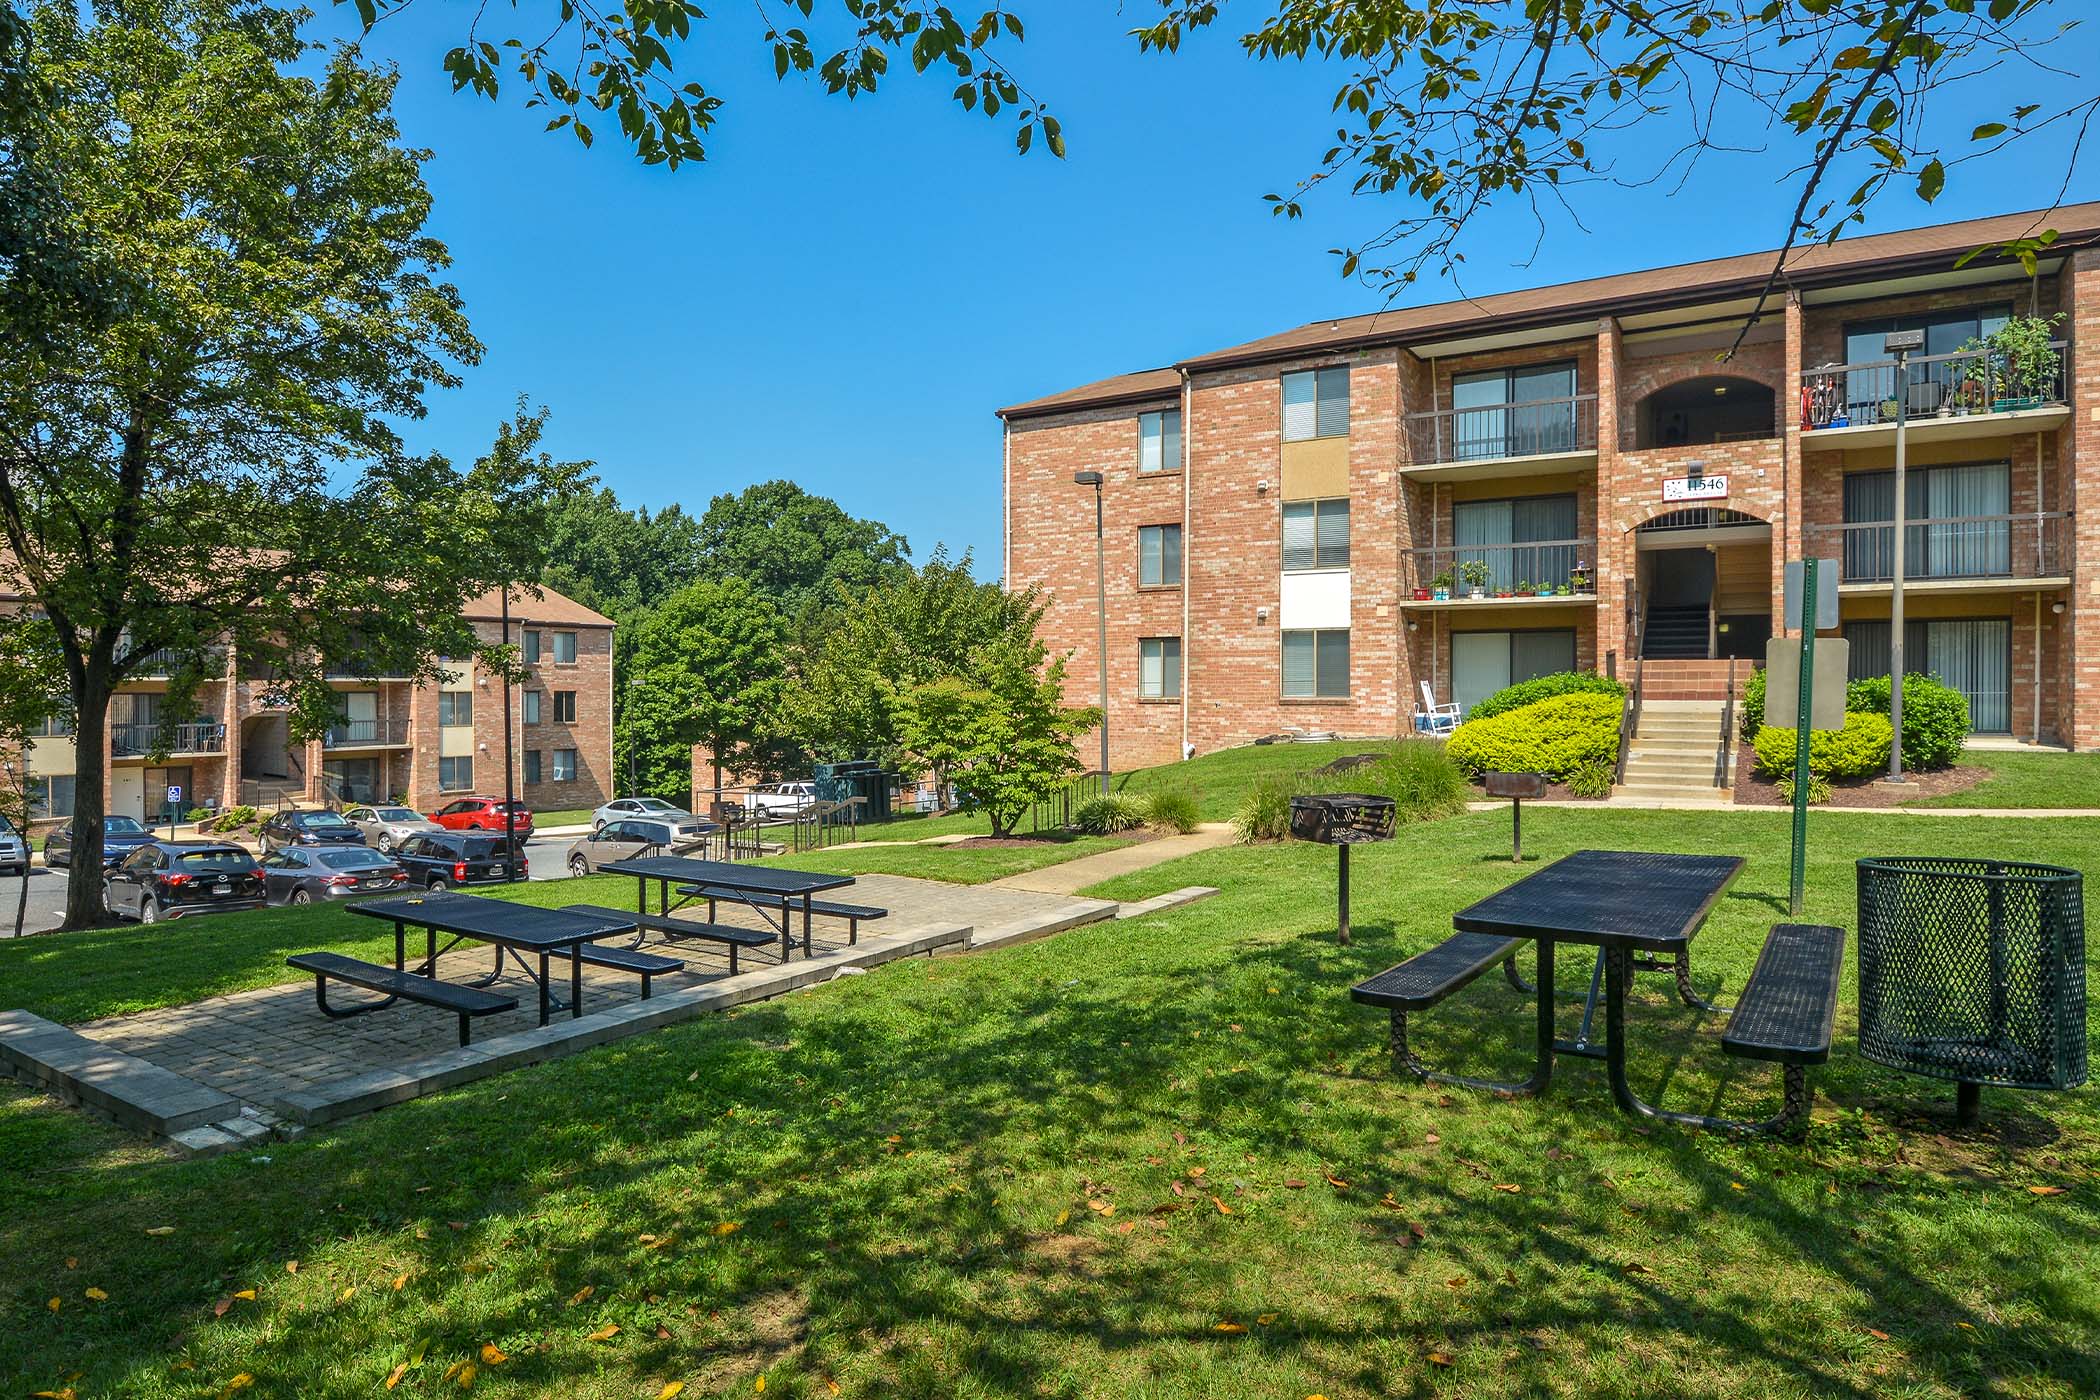 Picnic tables on the grounds at The Flats at Columbia Pike, Silver Spring, Maryland